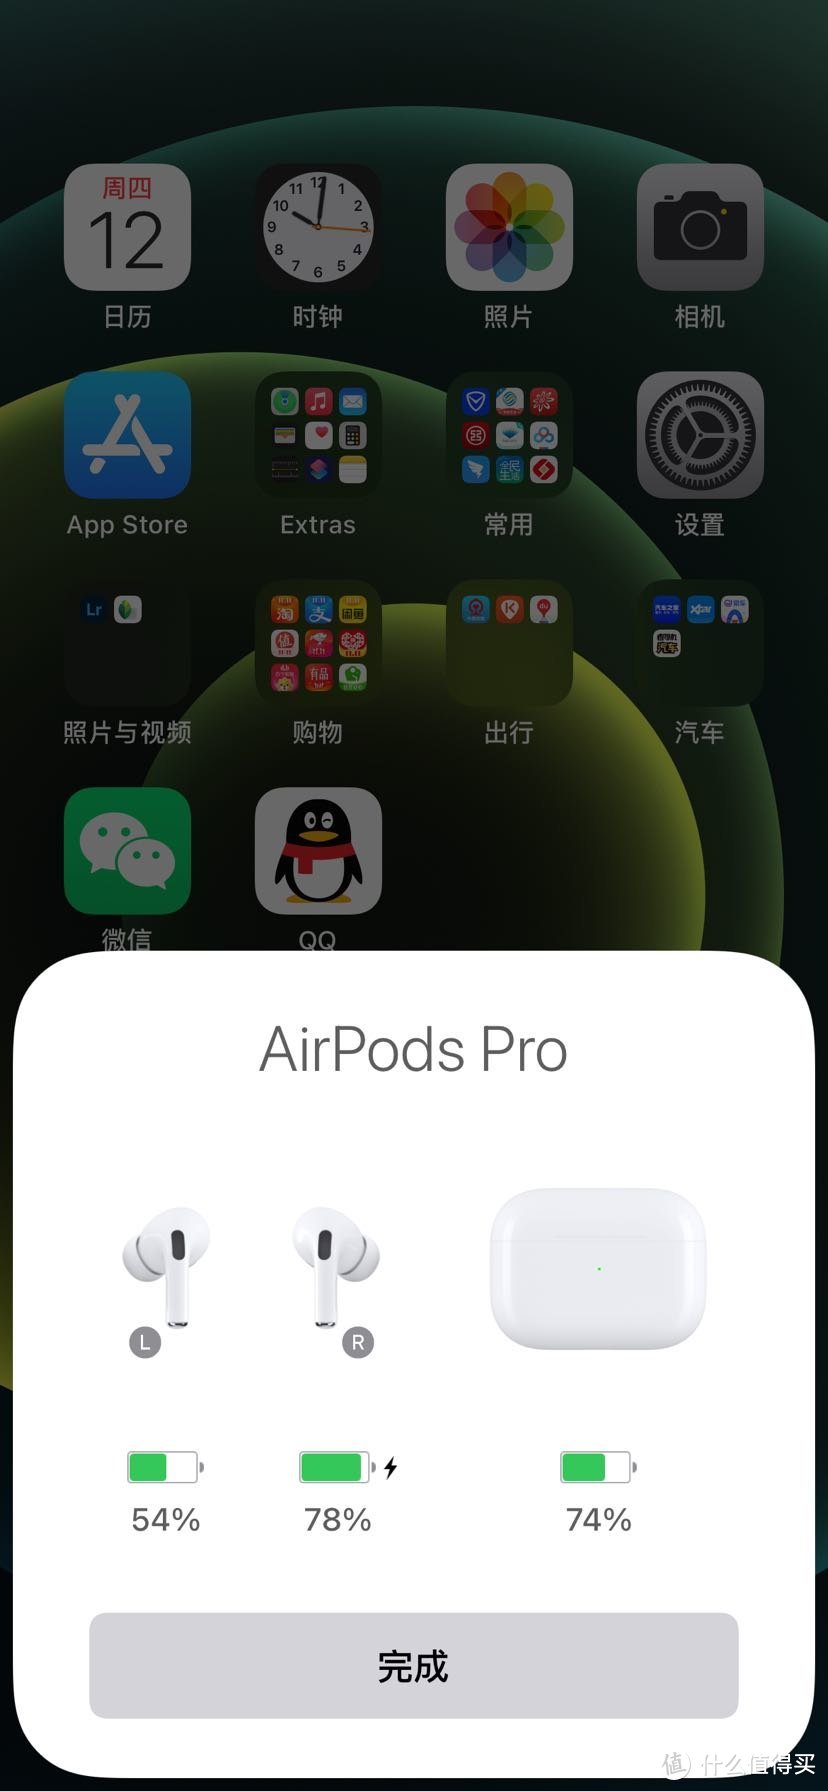 AirPods pro初体验